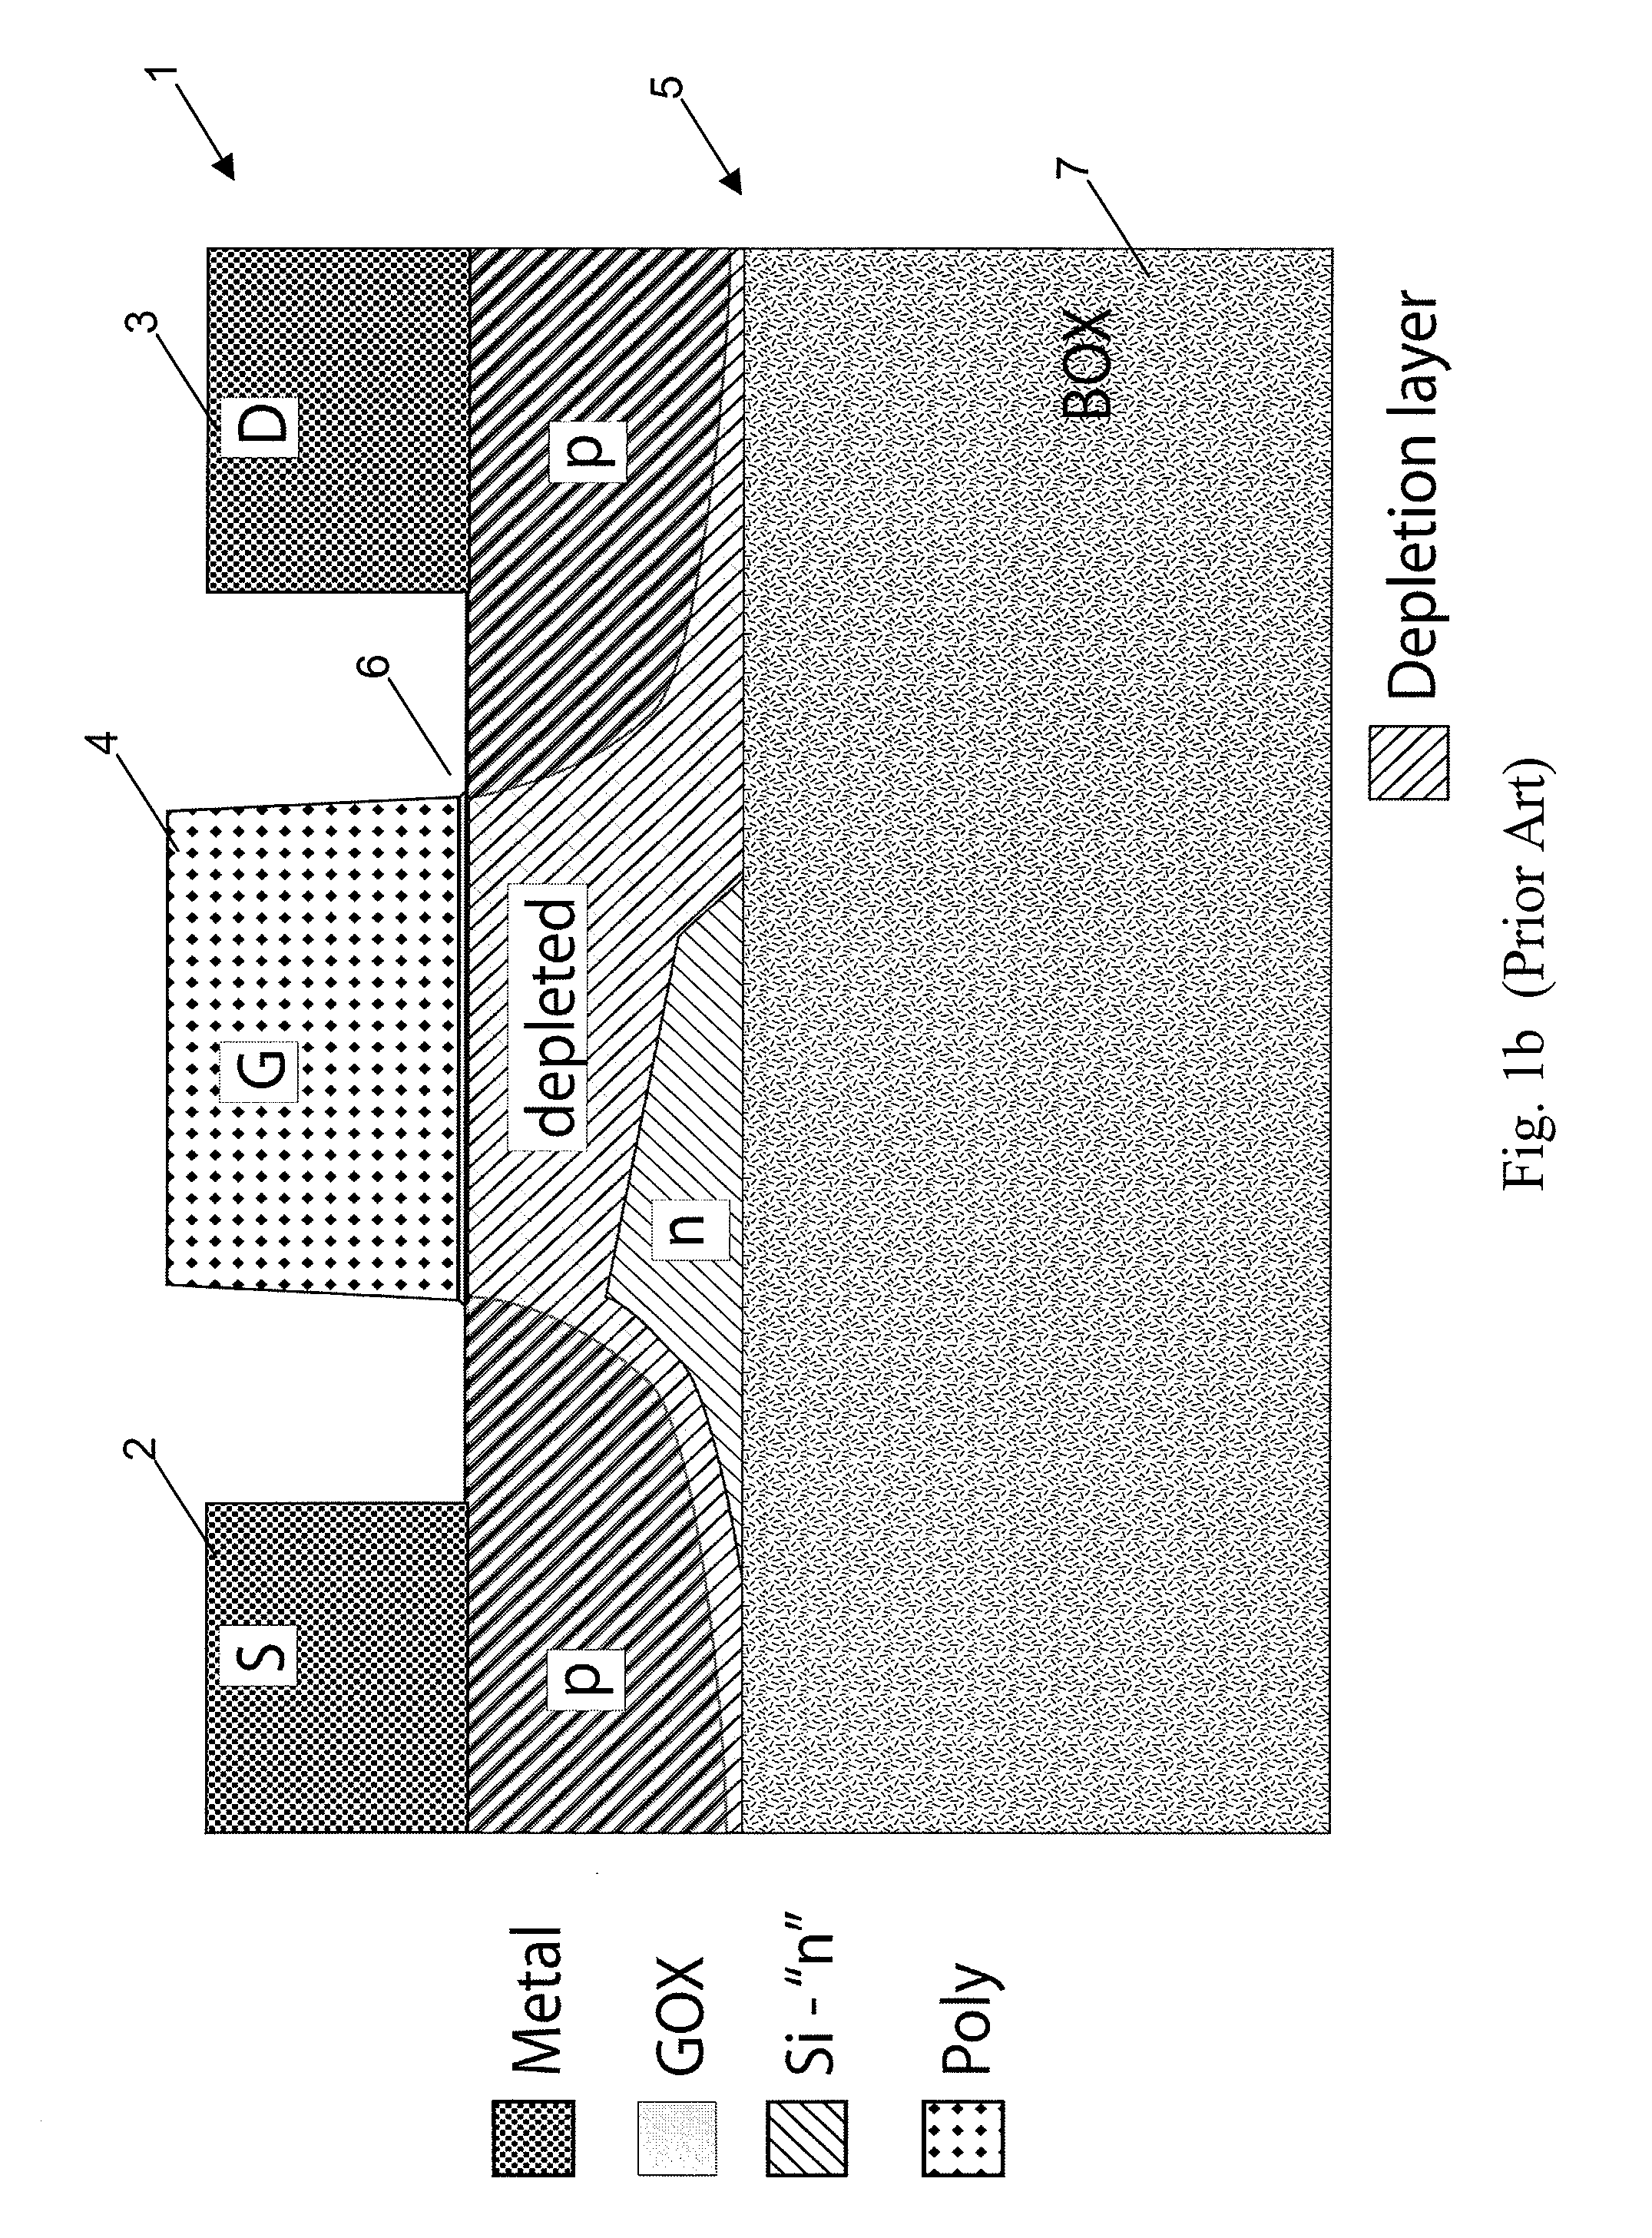 Integrated circuit device, system, and method of fabrication